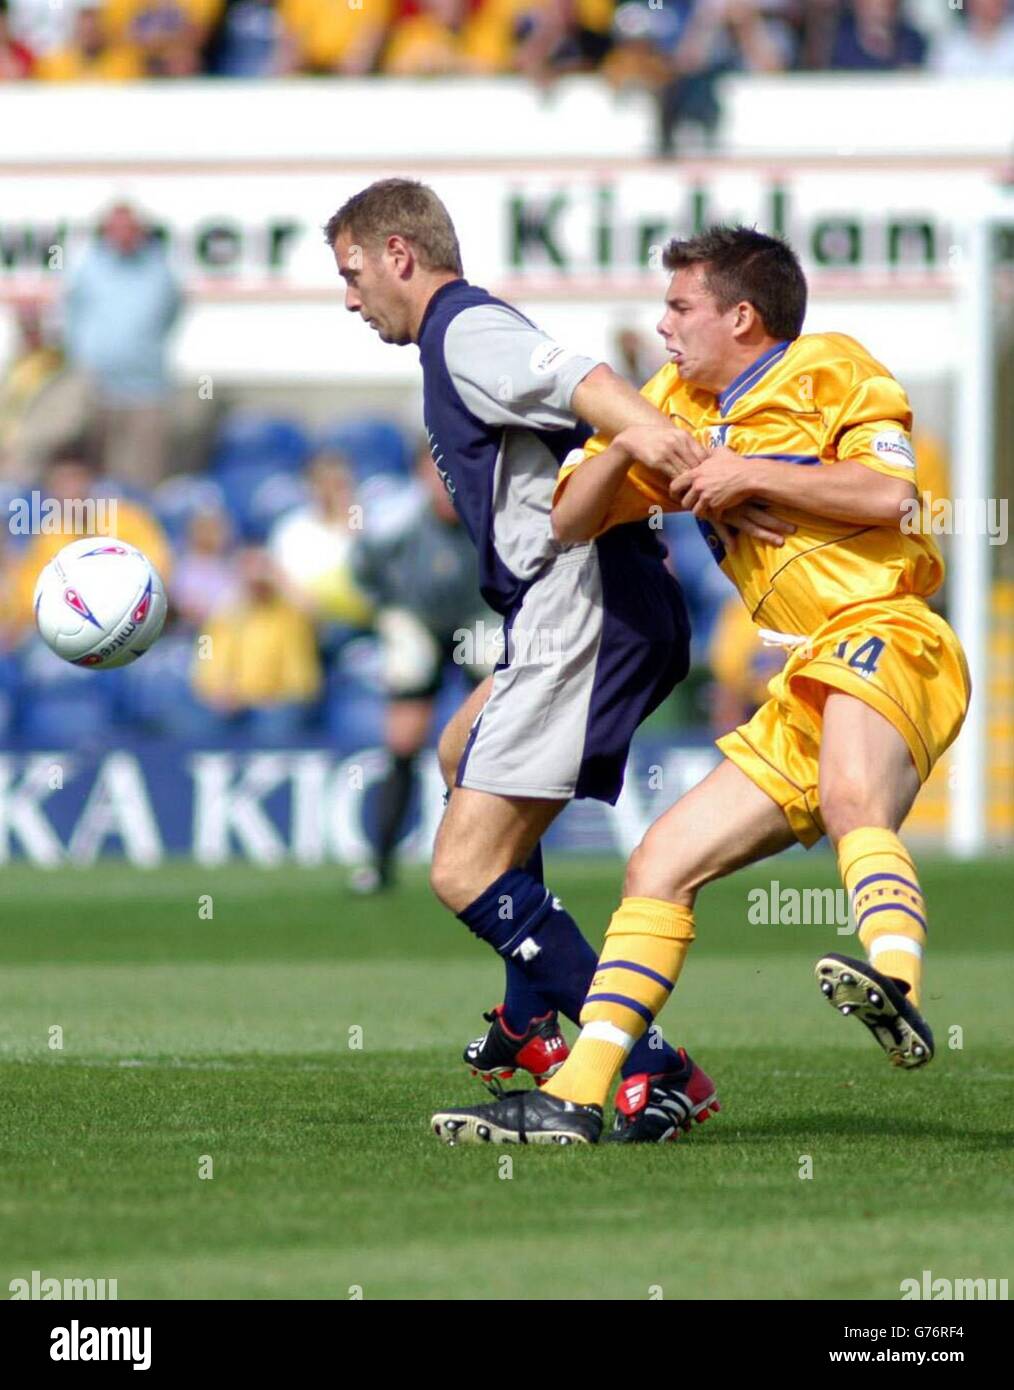 Chesterfield striker David Reeves (left) tussles with Mansfield's David Jervis during their Nationwide Division Two match at Mansfield's Field Mill ground. NO UNOFFICIAL CLUB WEBSITE USE. Stock Photo